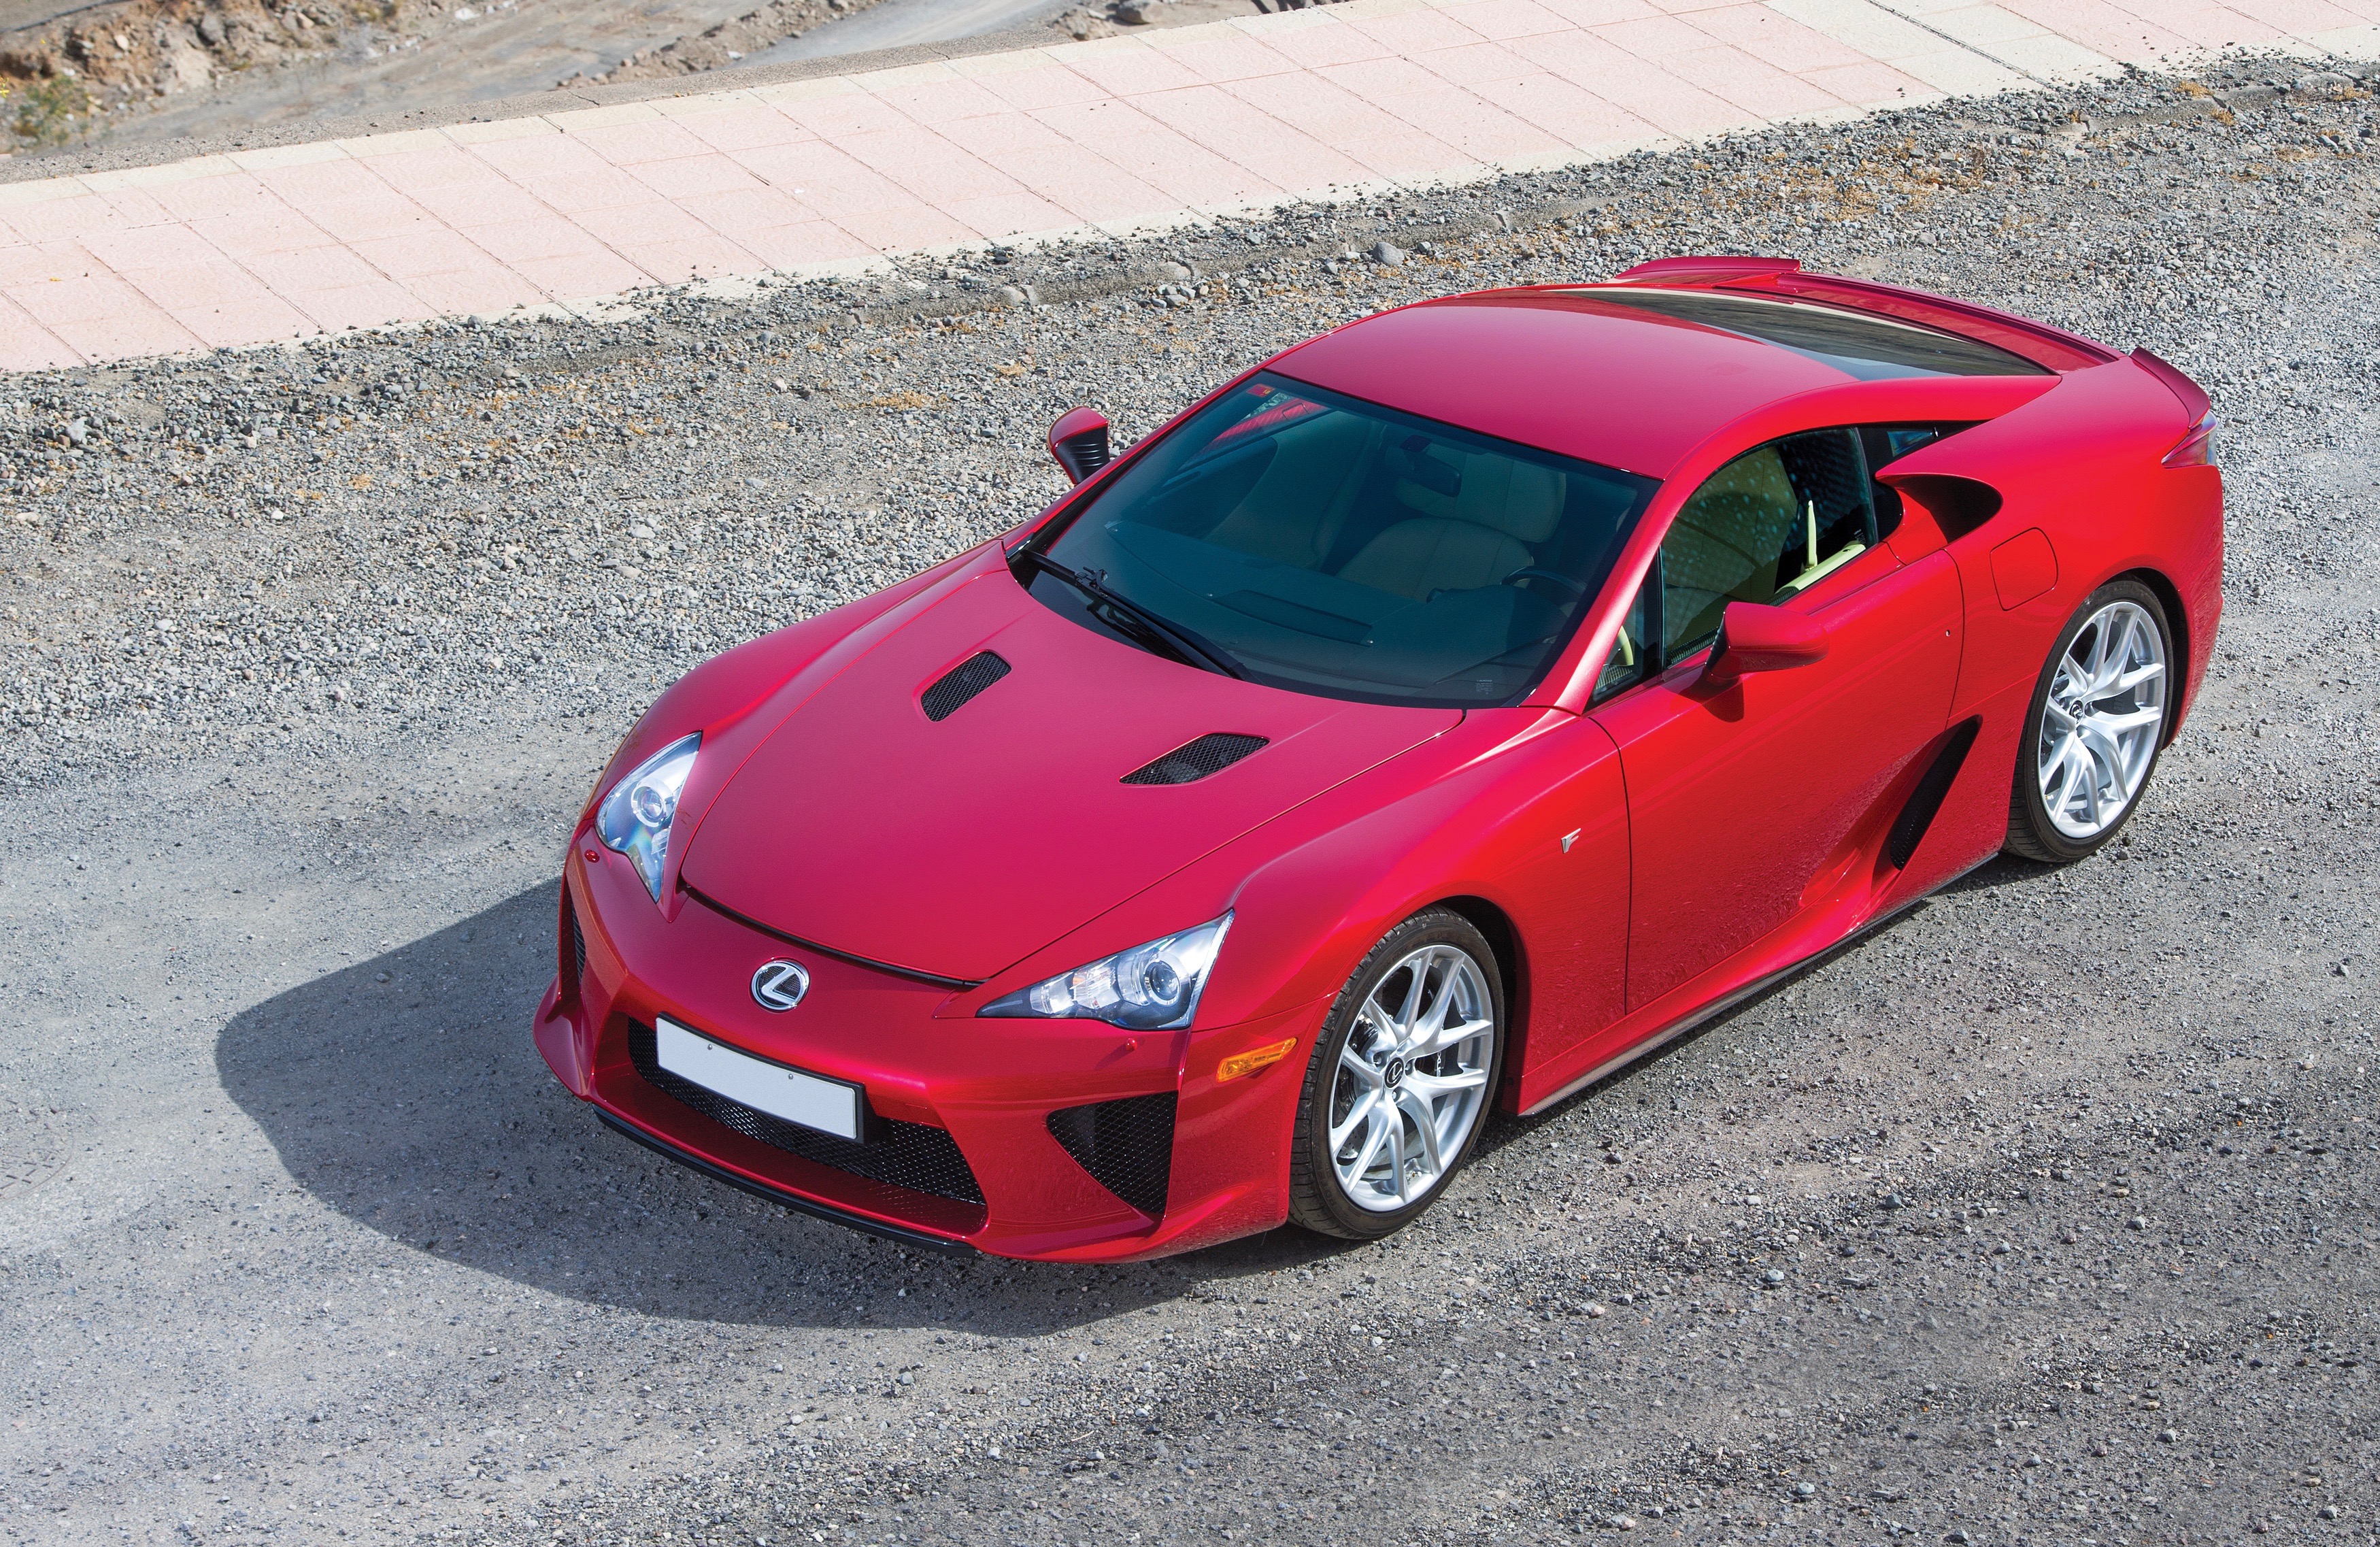 Lexus Lfa Buy It Now While It S Still Affordable Classiccars